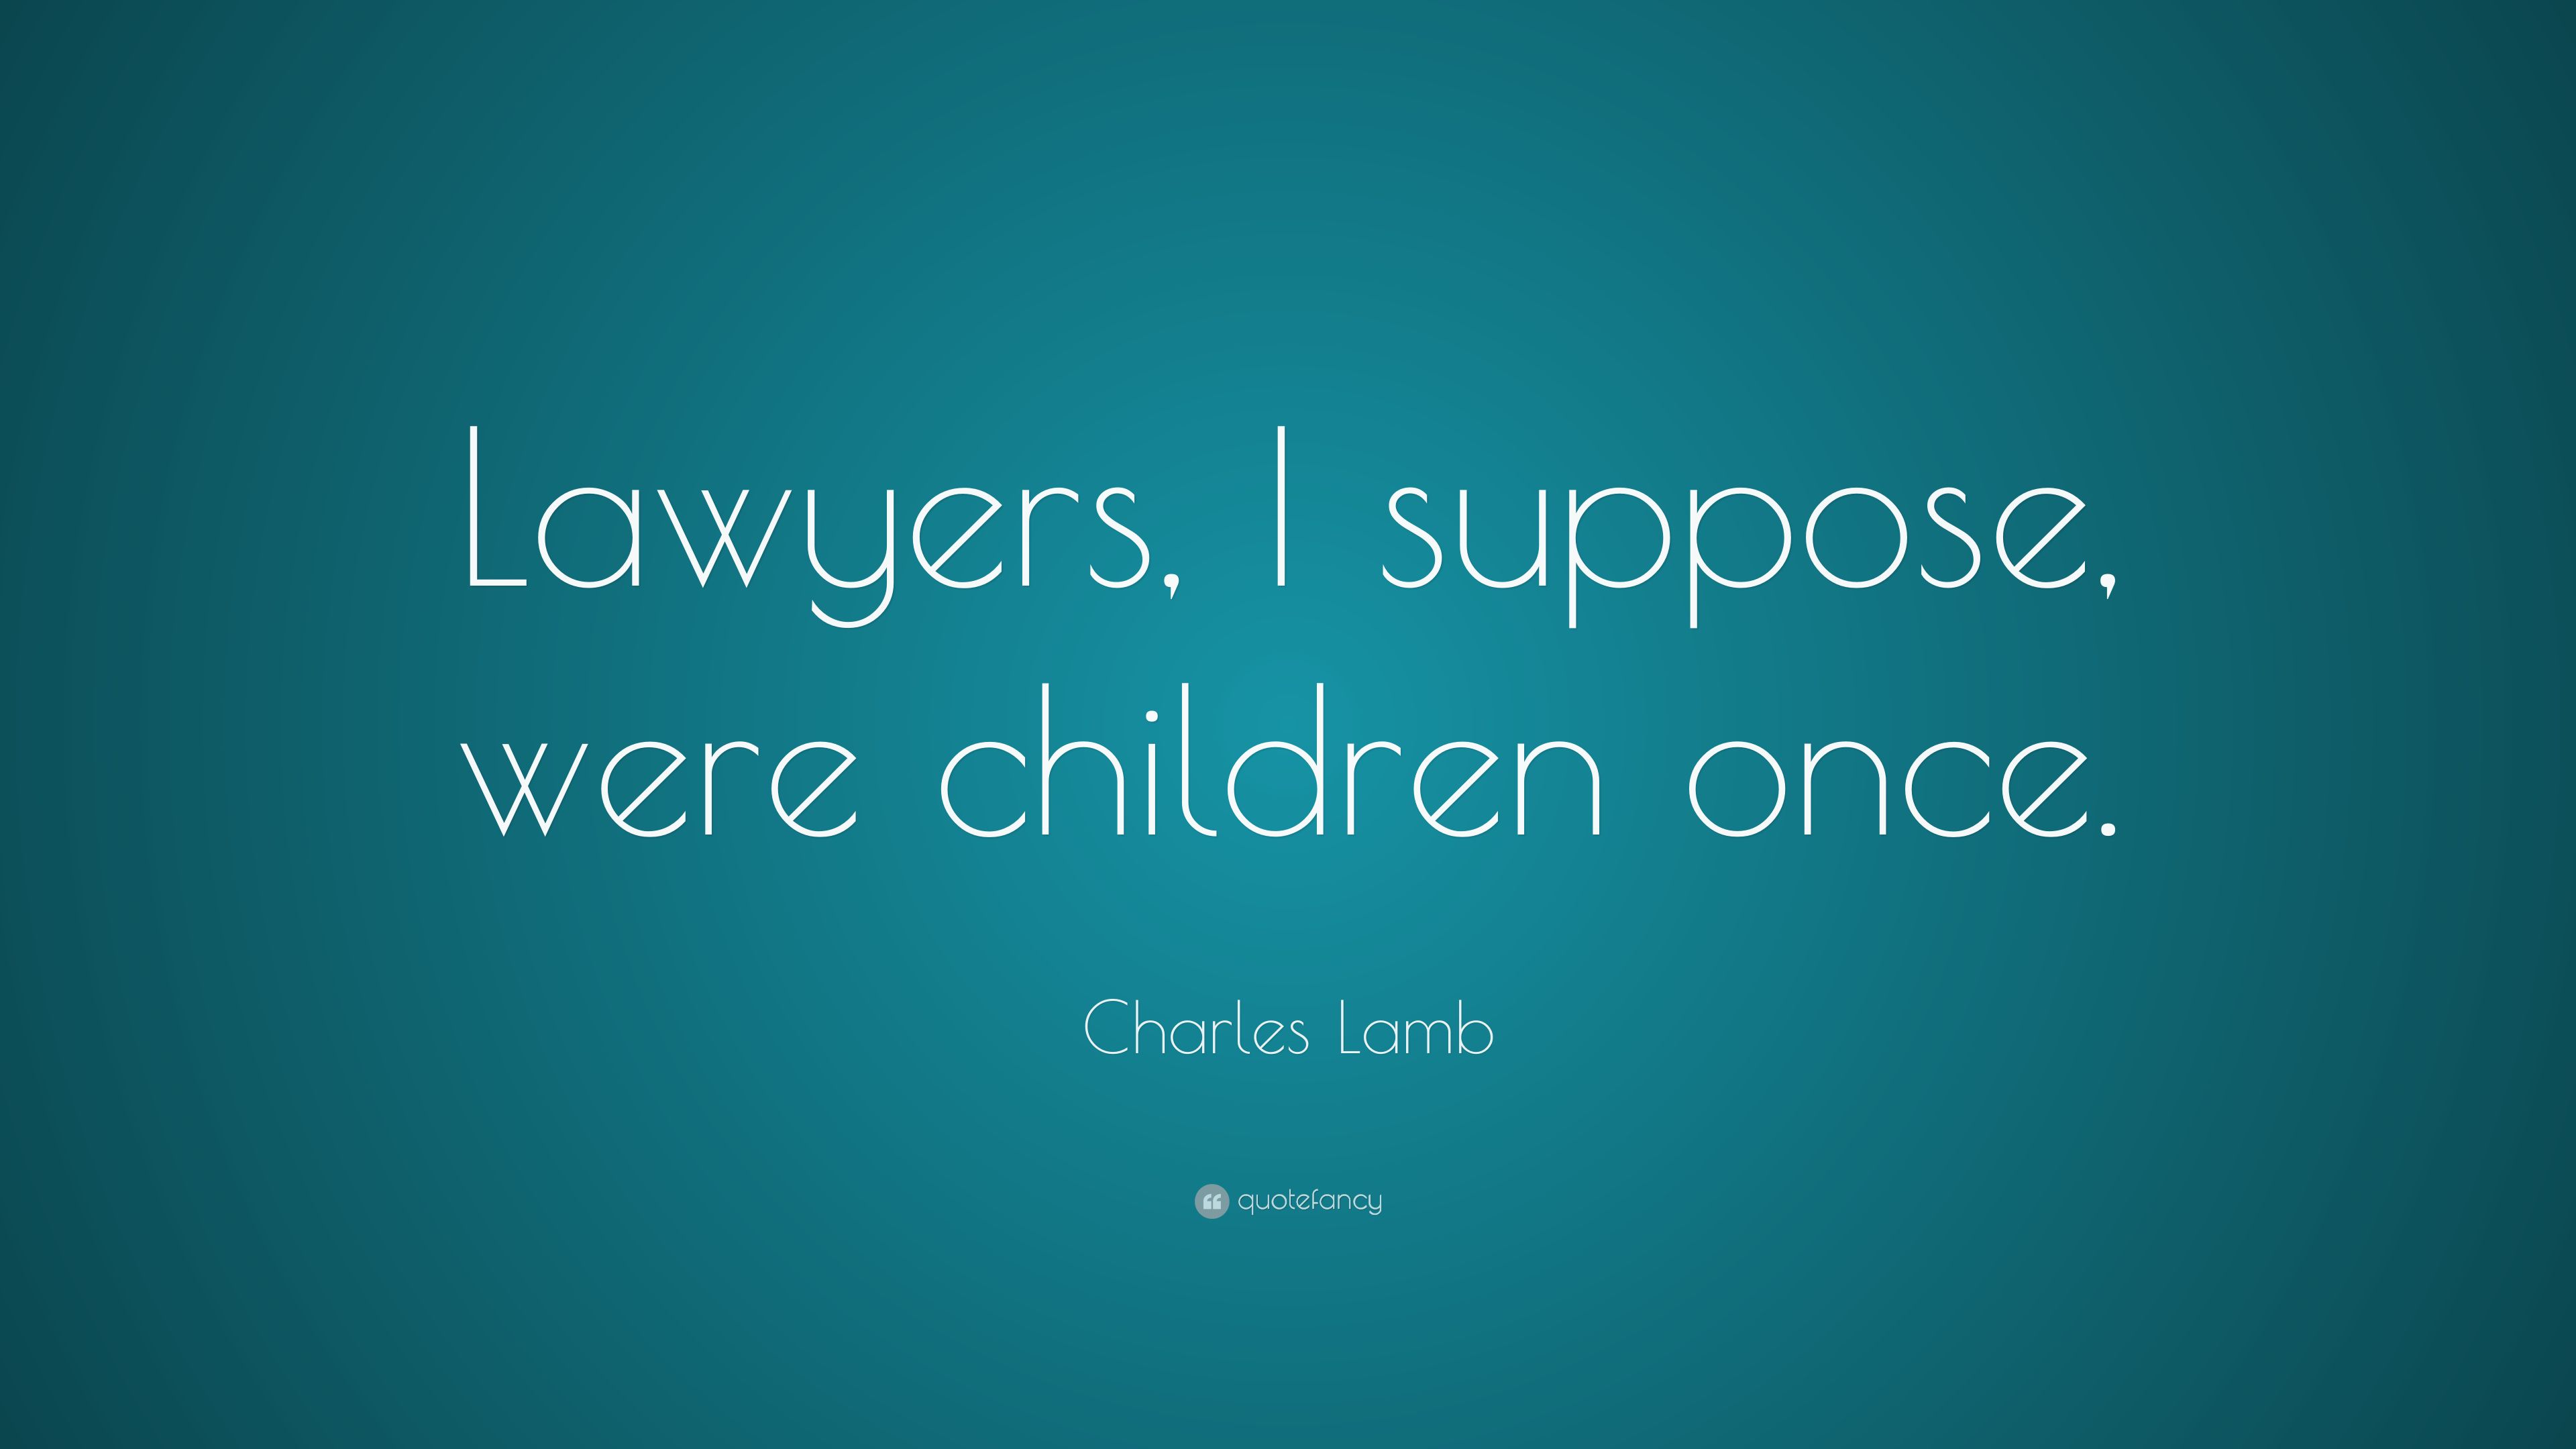 Charles Lamb Quote: “Lawyers, I suppose, were children once.” (6 wallpaper)